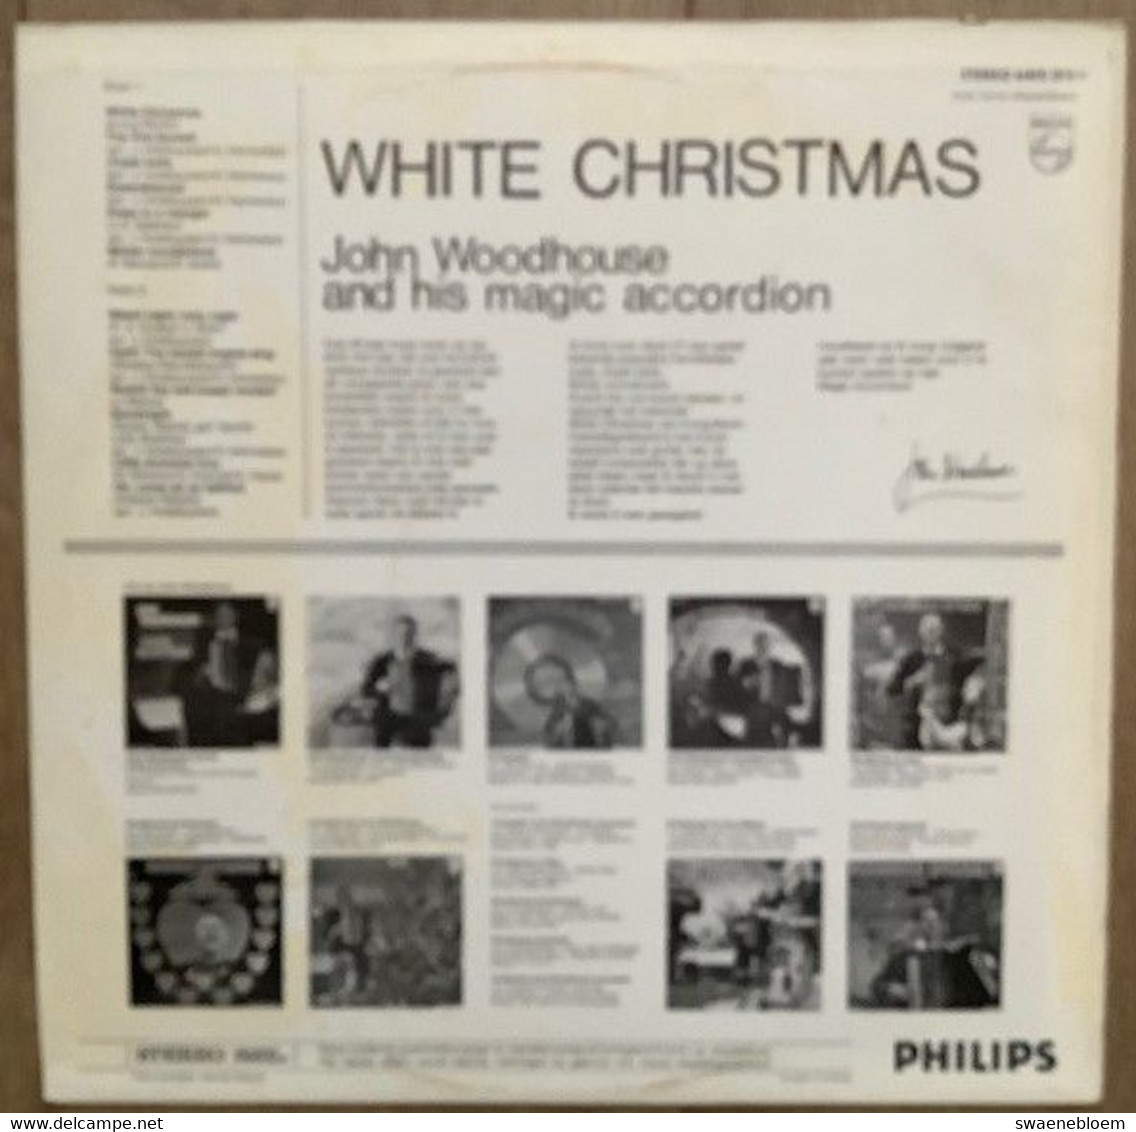 LP.- WHITE CHRISTMAS. JOHN WOODHOUSE & HIS MAGIC ACCORDION - Weihnachtslieder